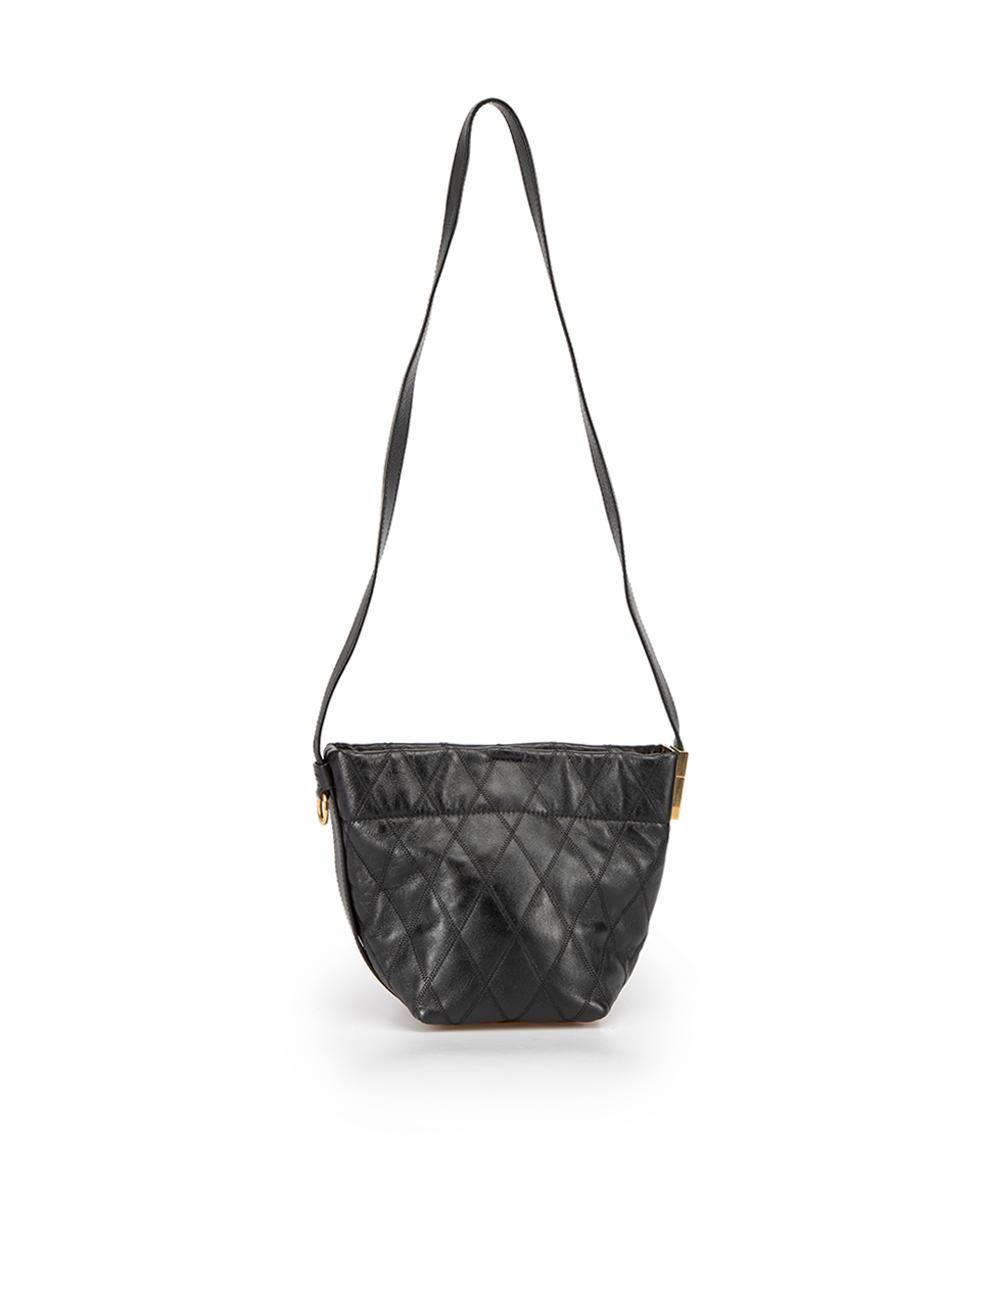 Givenchy Women's Black Leather GV Quilted Bucket Bag In Good Condition For Sale In London, GB